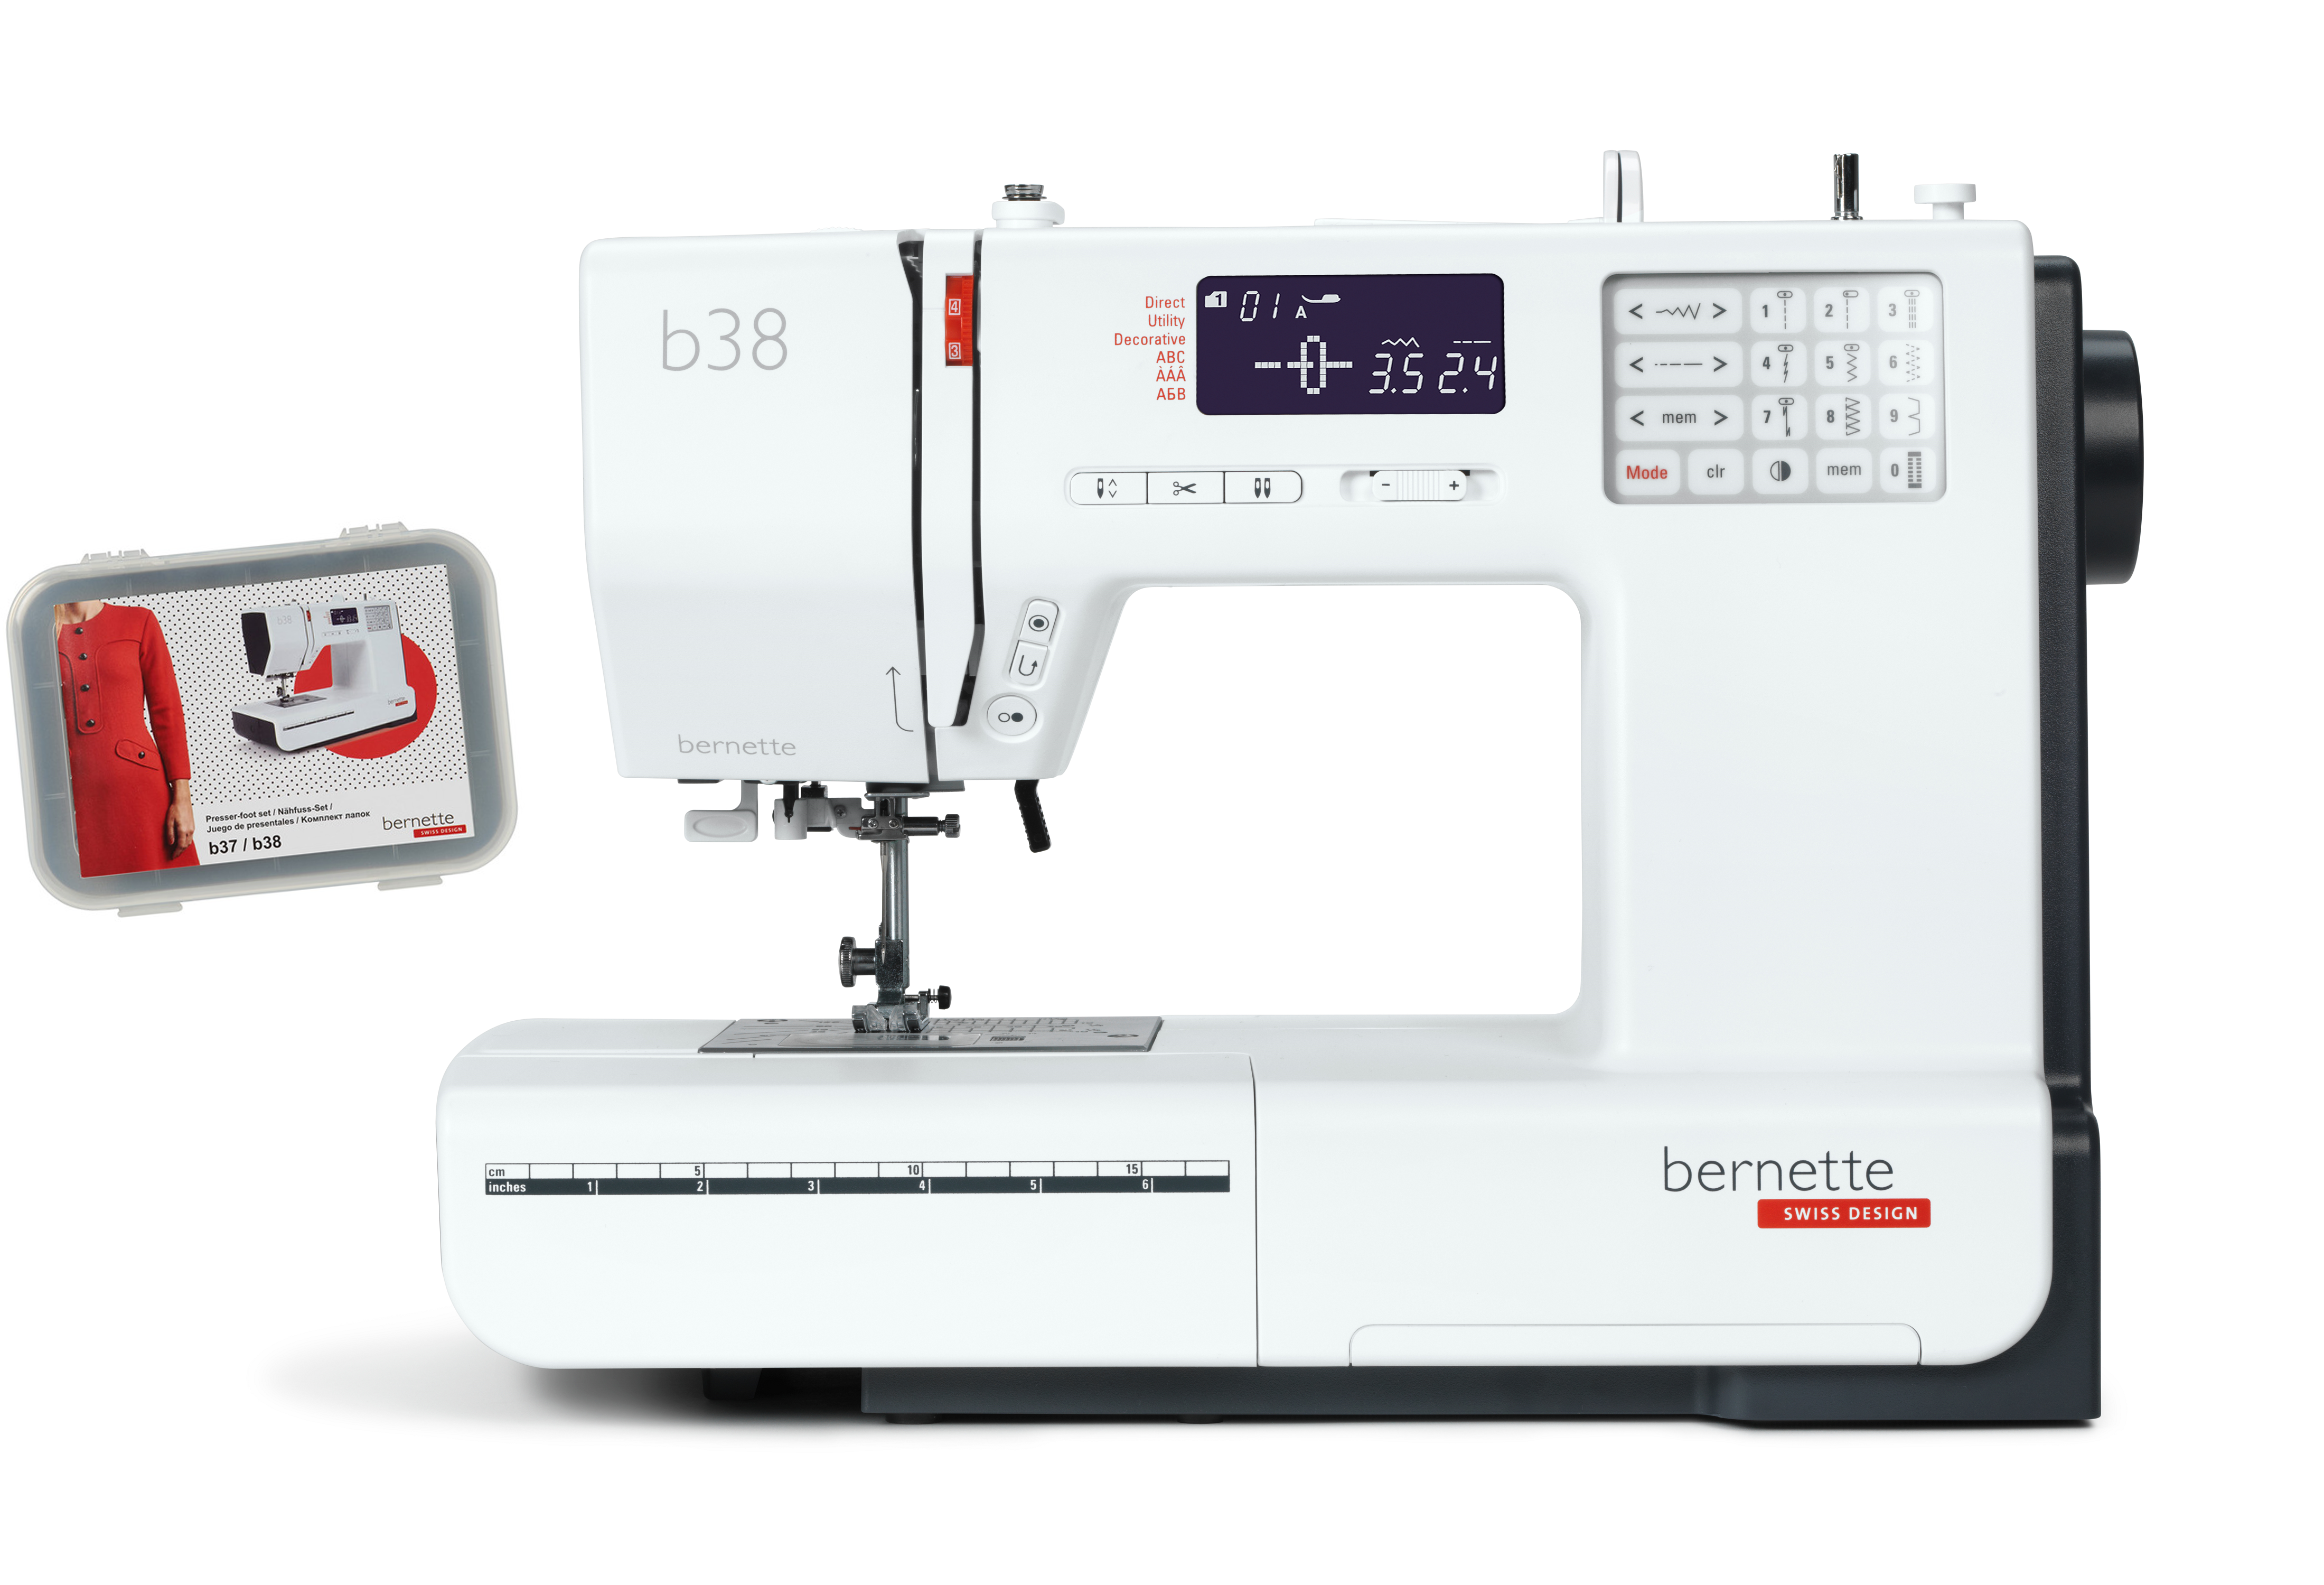 Bernette b38 Sewing Machine for Sale at World Weidner